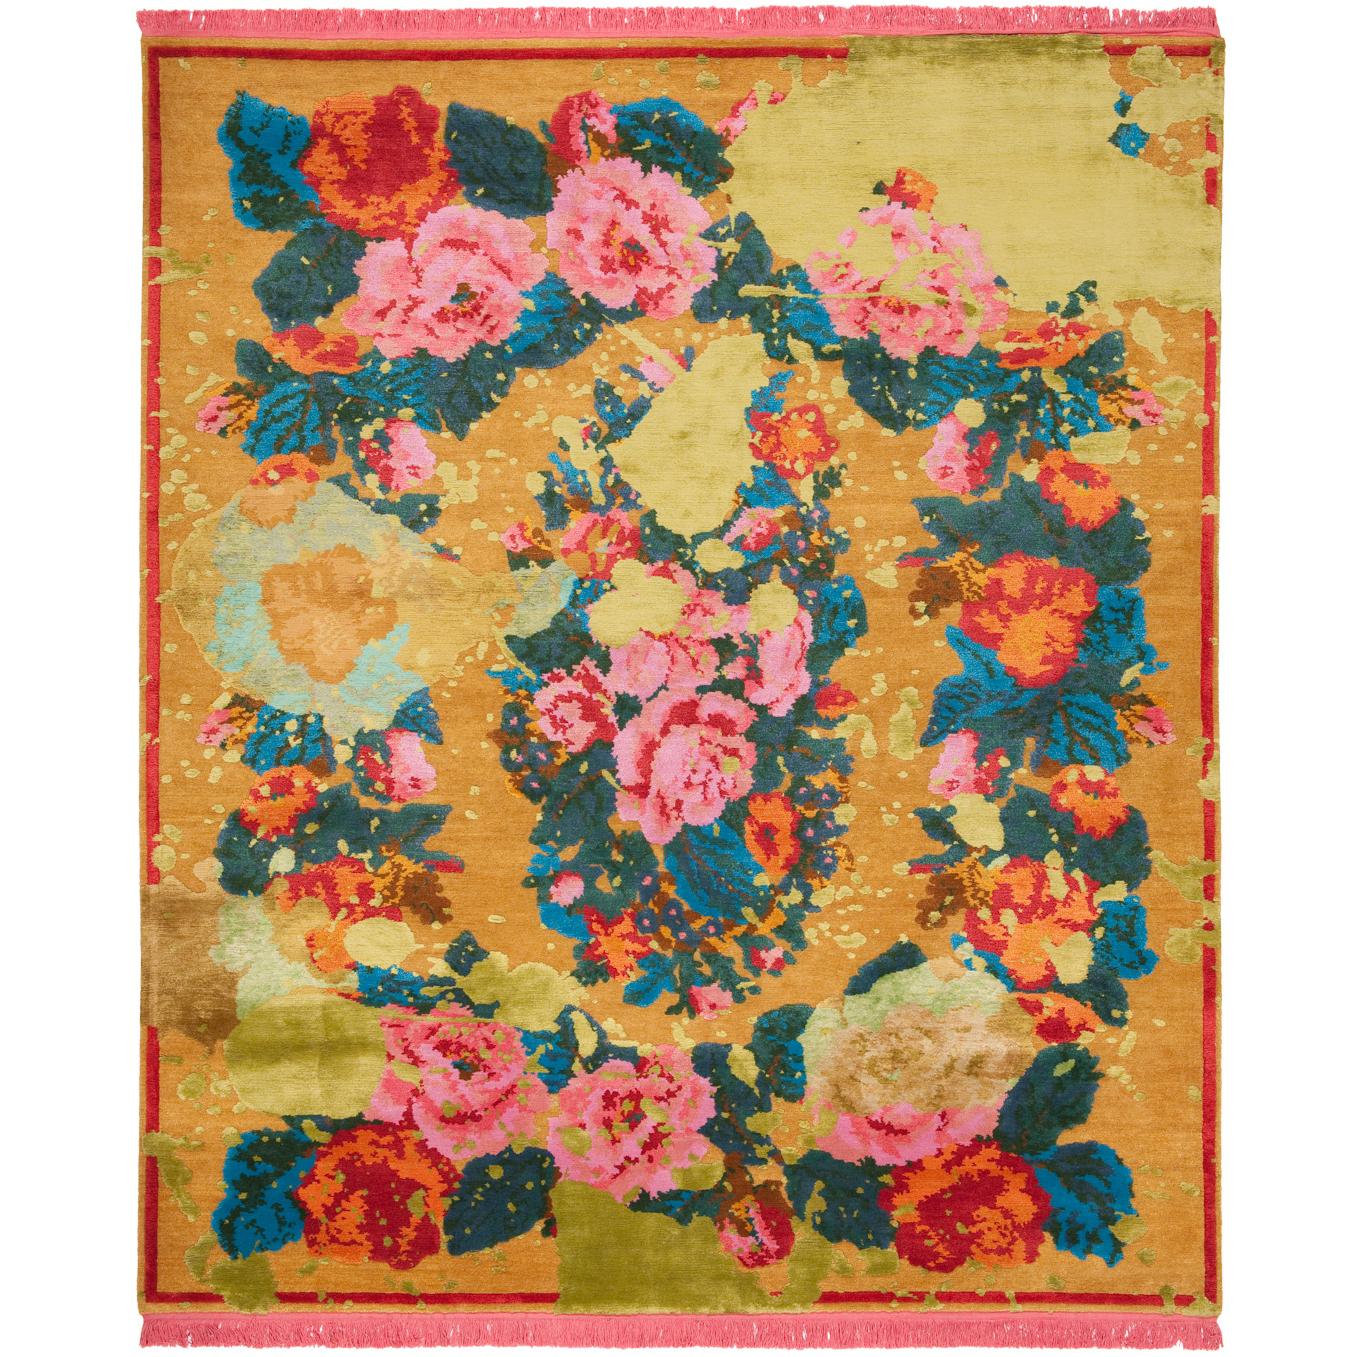 Janka Splashed Hand-Knotted Silk and Wool Blend Rug with Fringes